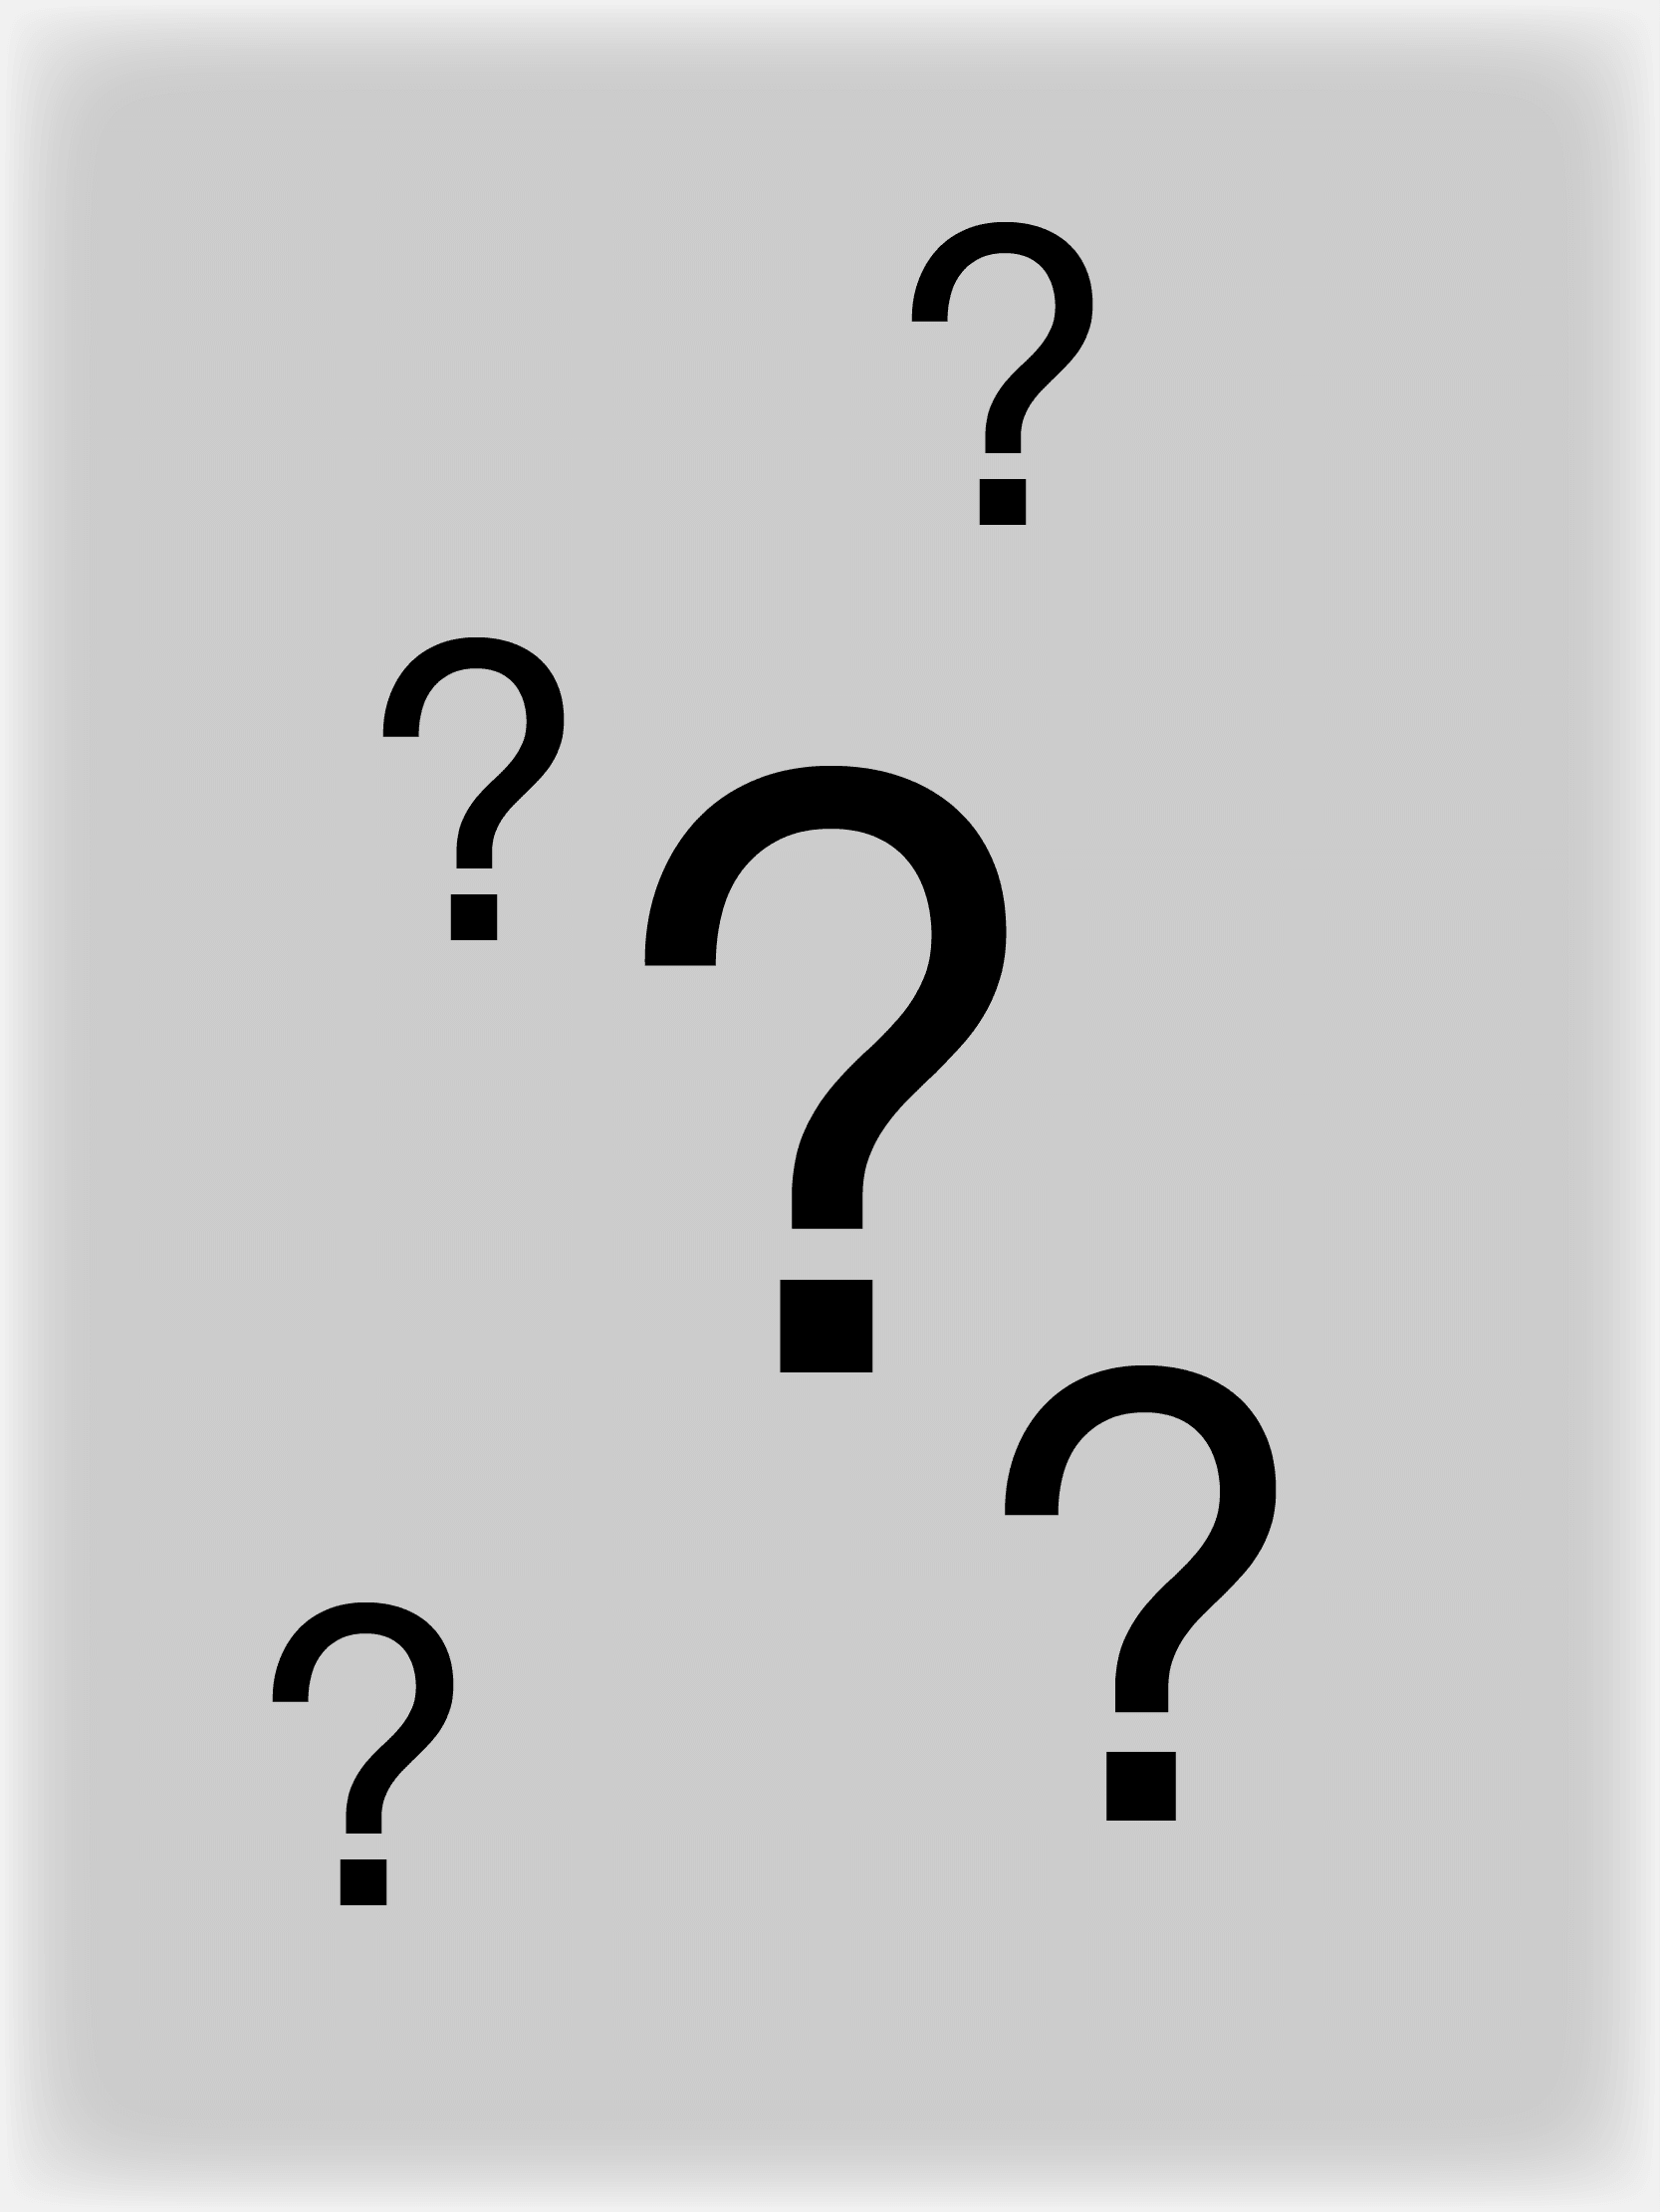 question_mark